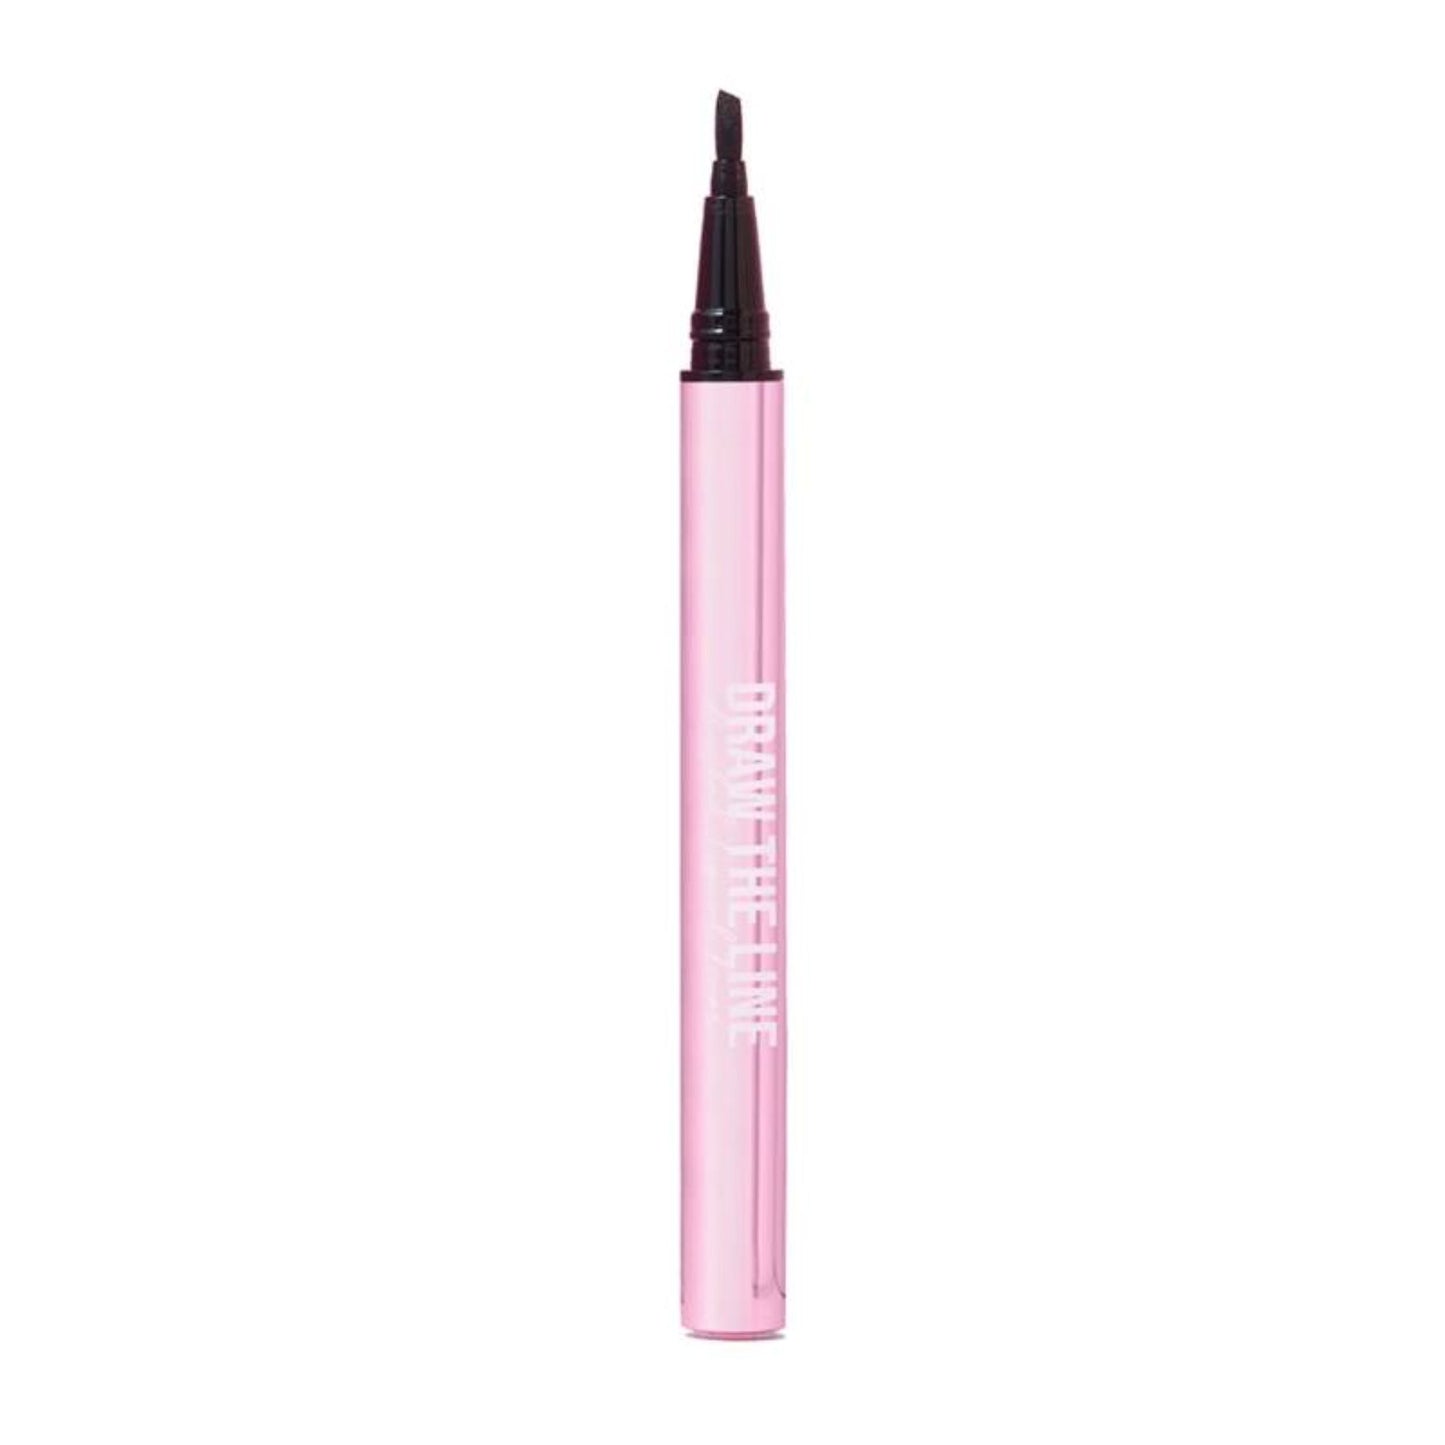 Delineador DRAW THE LINE ANGLED LIQUID LINER BEAUTY CREATIONS